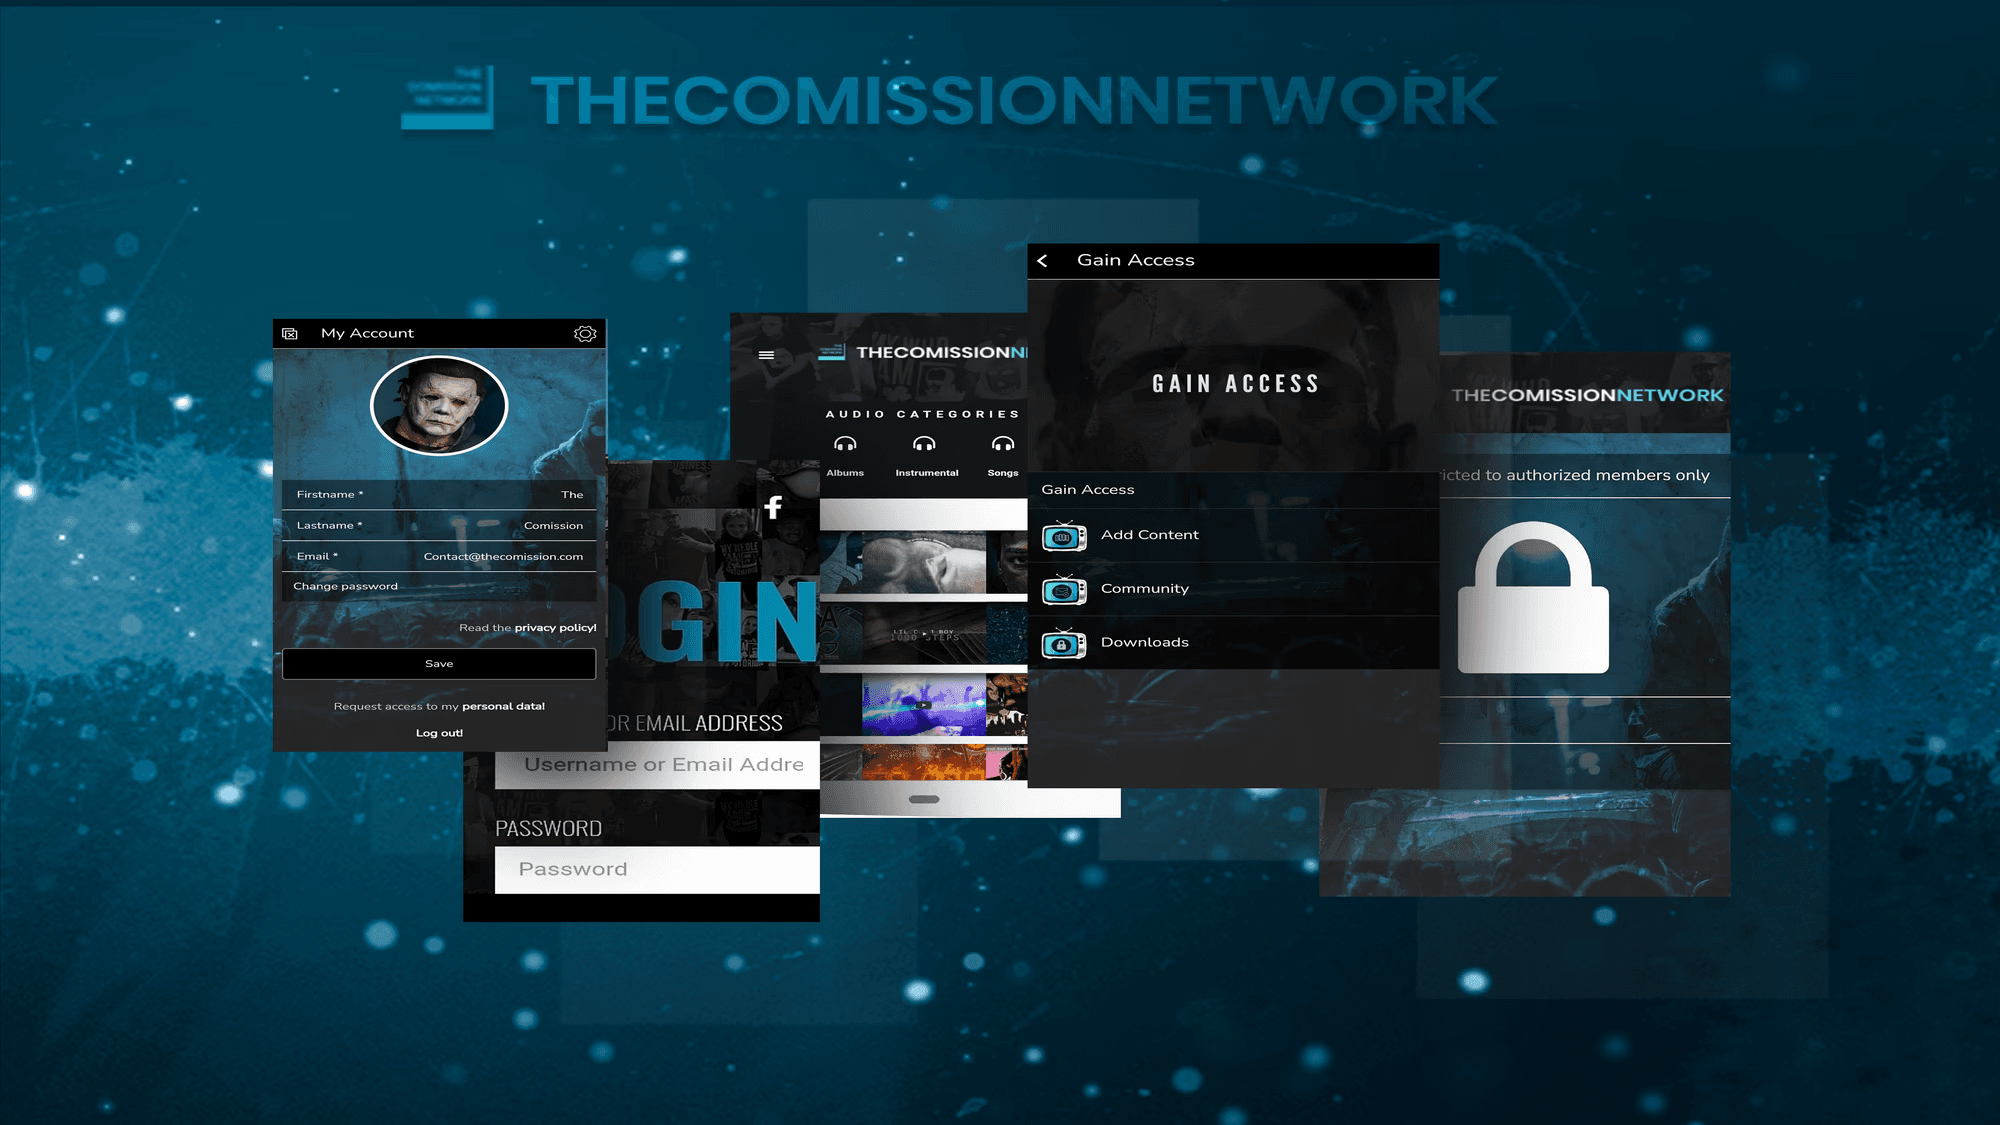 GAIN ACCESS: THECOMISSION NETWORK